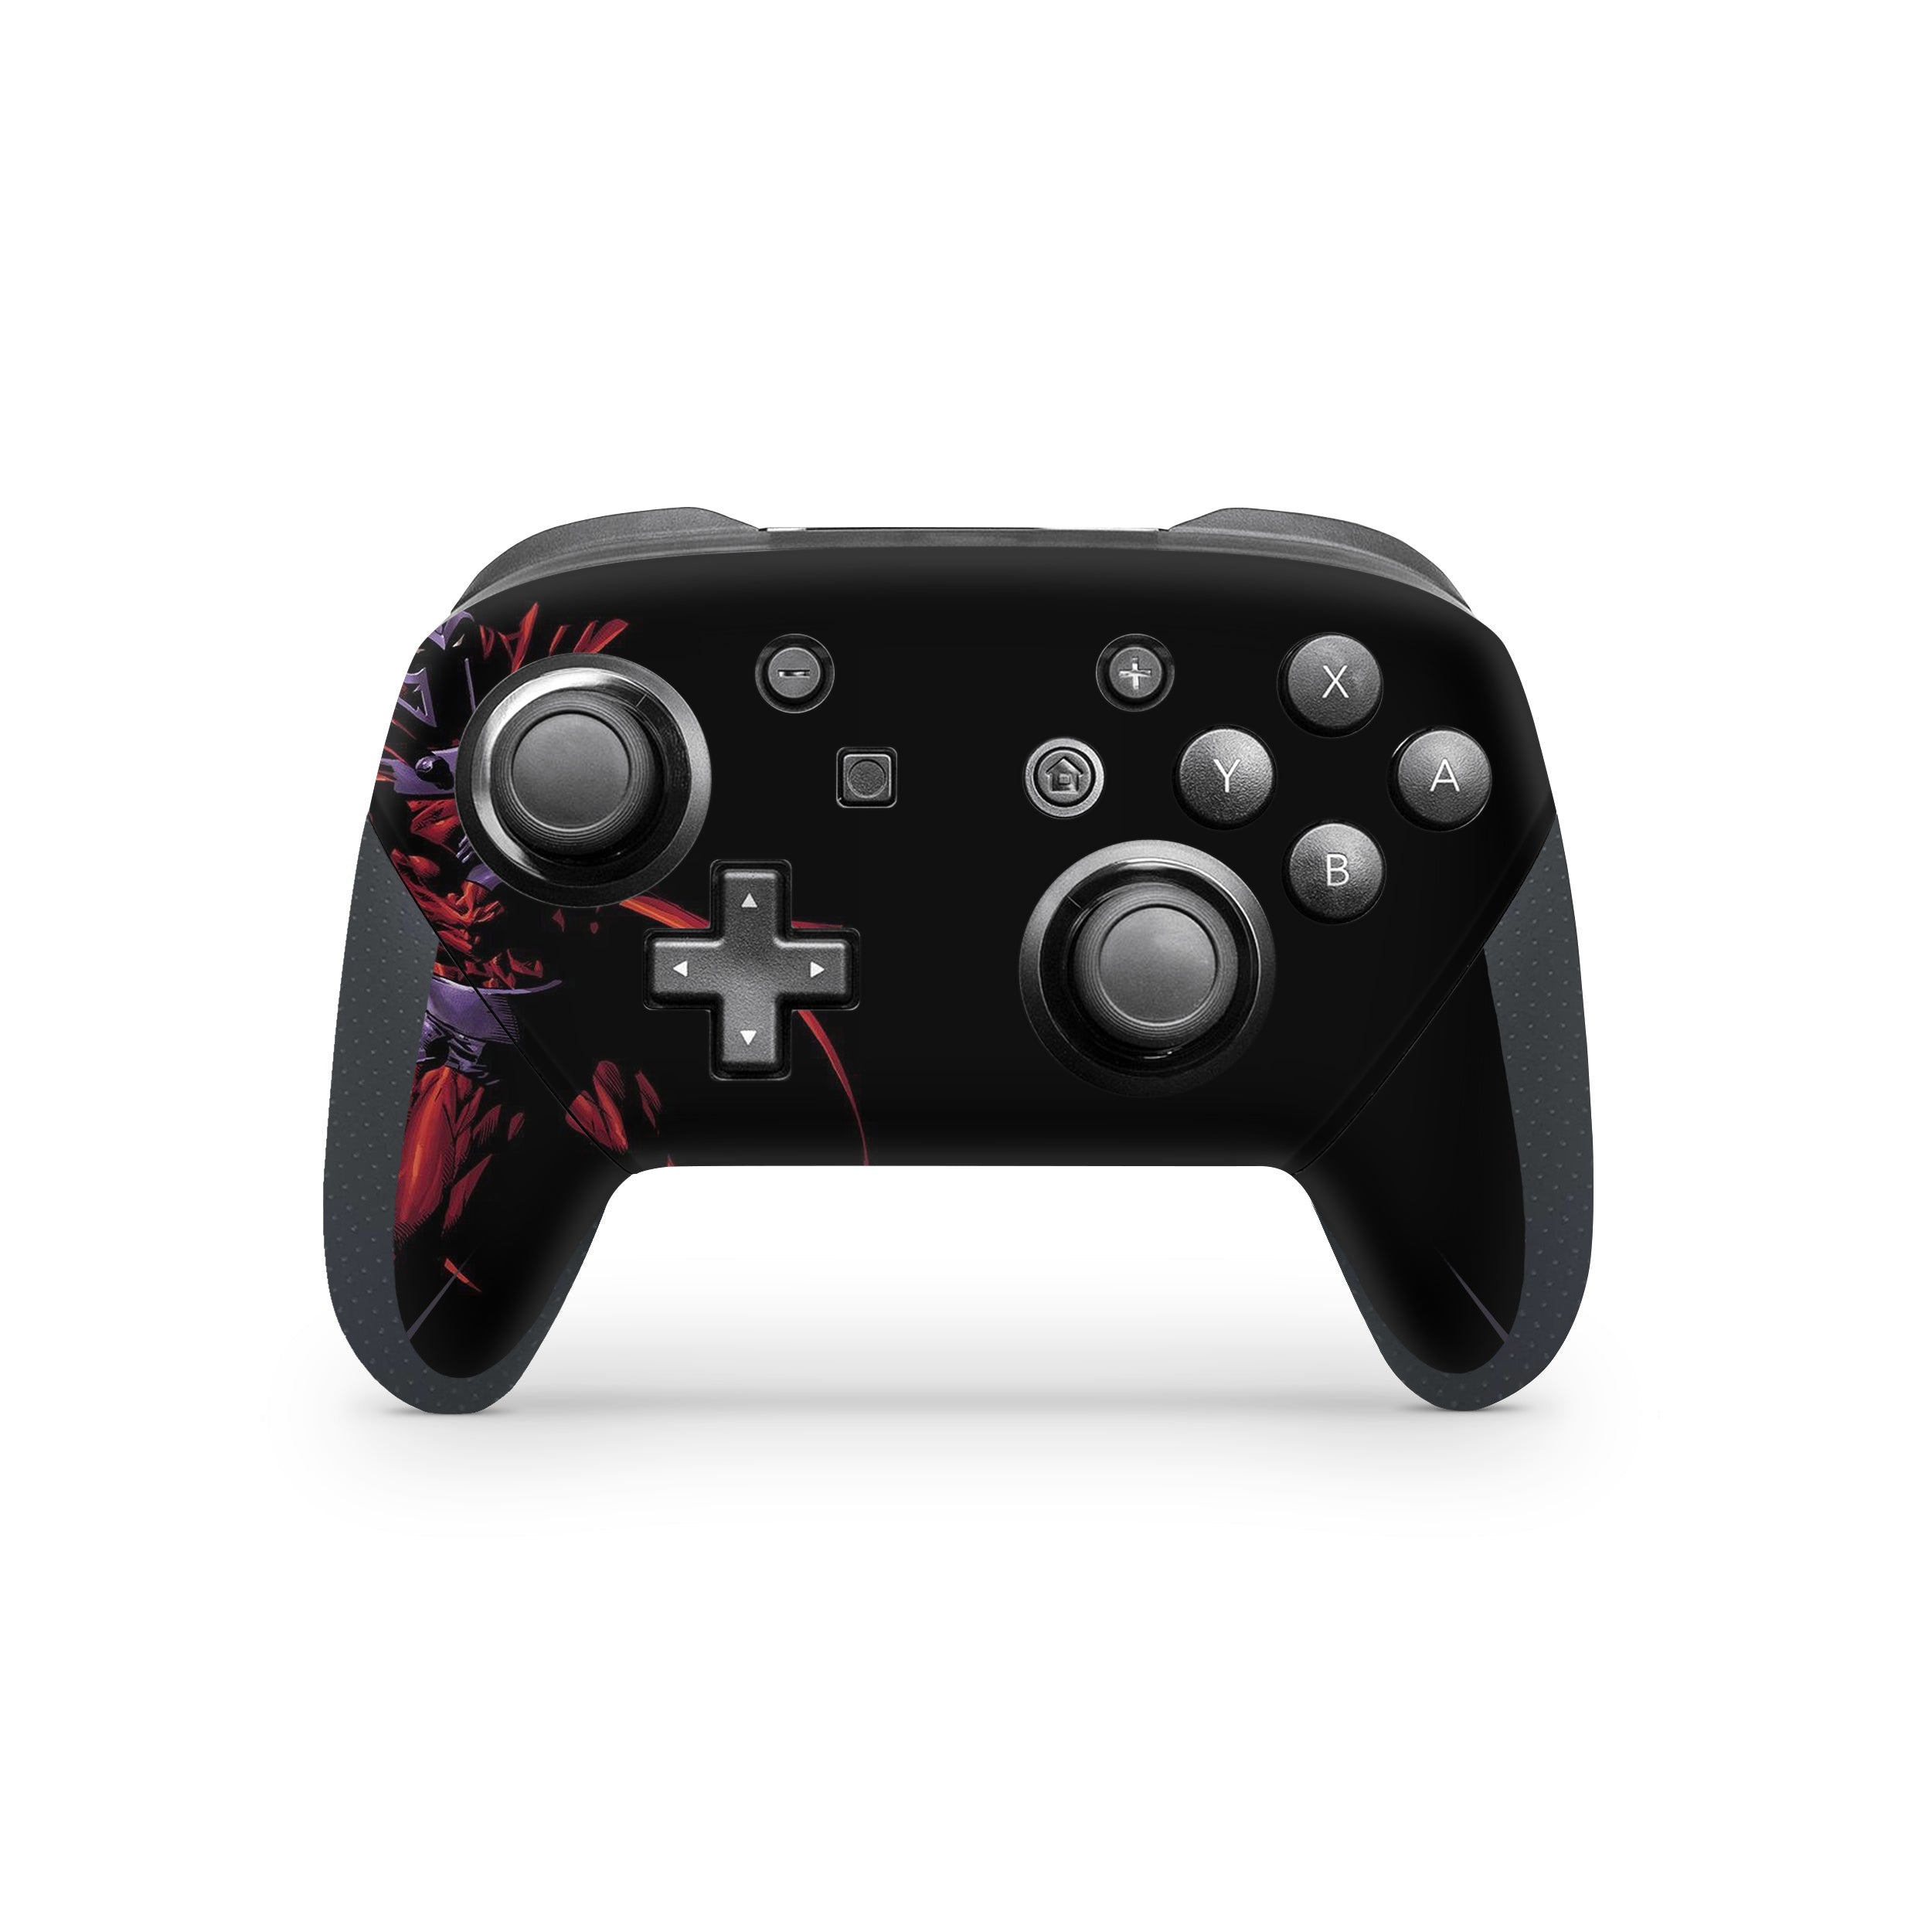 A video game skin featuring a Marvel X Men Magneto design for the Switch Pro Controller.